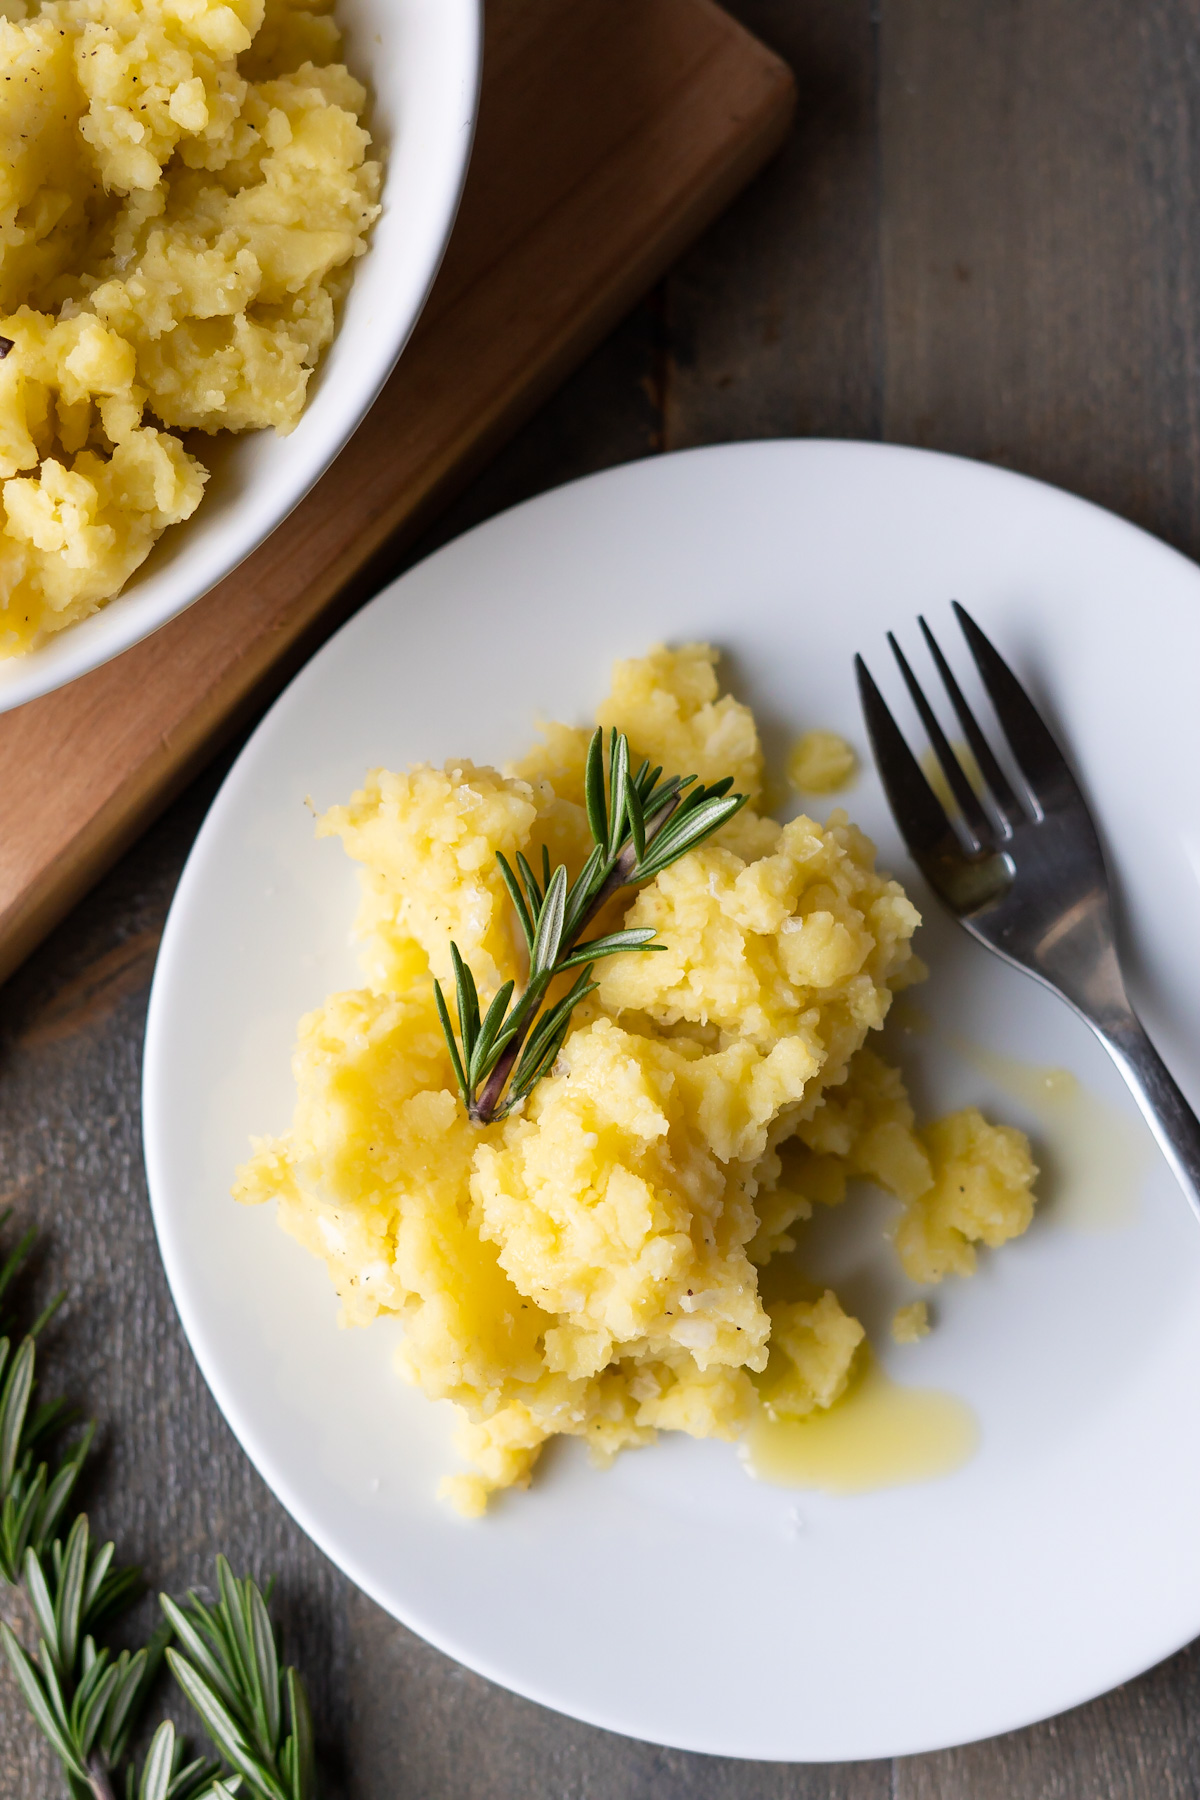 A serving of olive oil mashed potatoes on a plate, garnished with fresh rosemary.